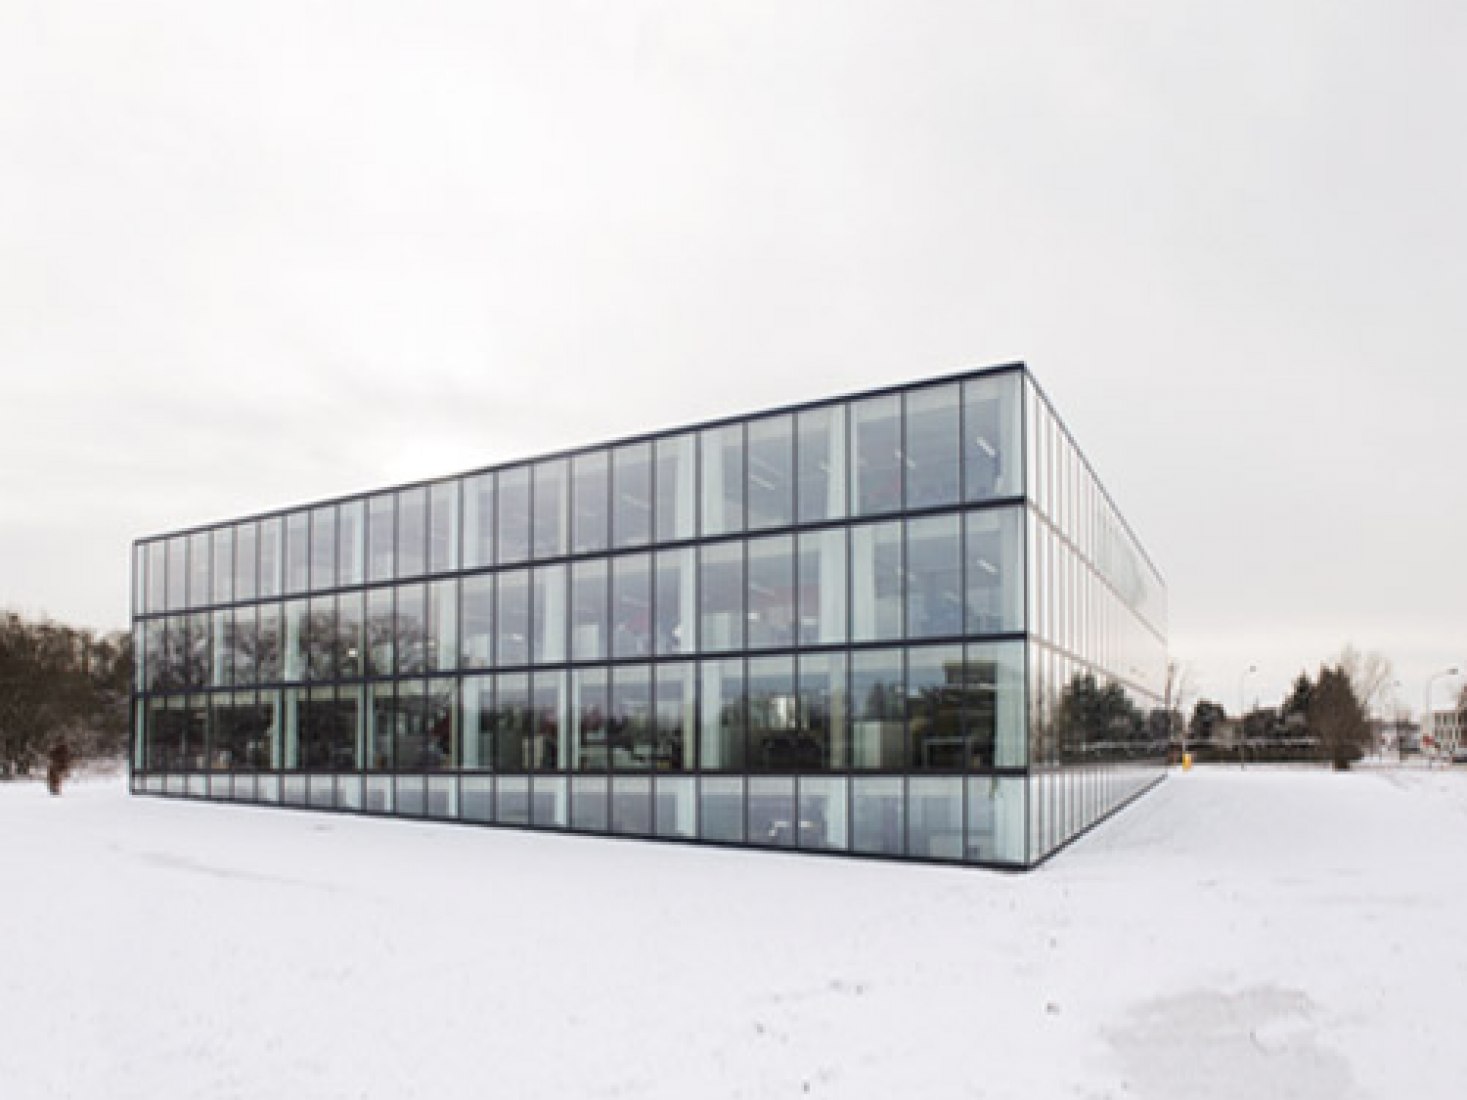 The projects VOKA and Kortrijk Xpo are both nominated for the Mies van der Rohe Award 2011